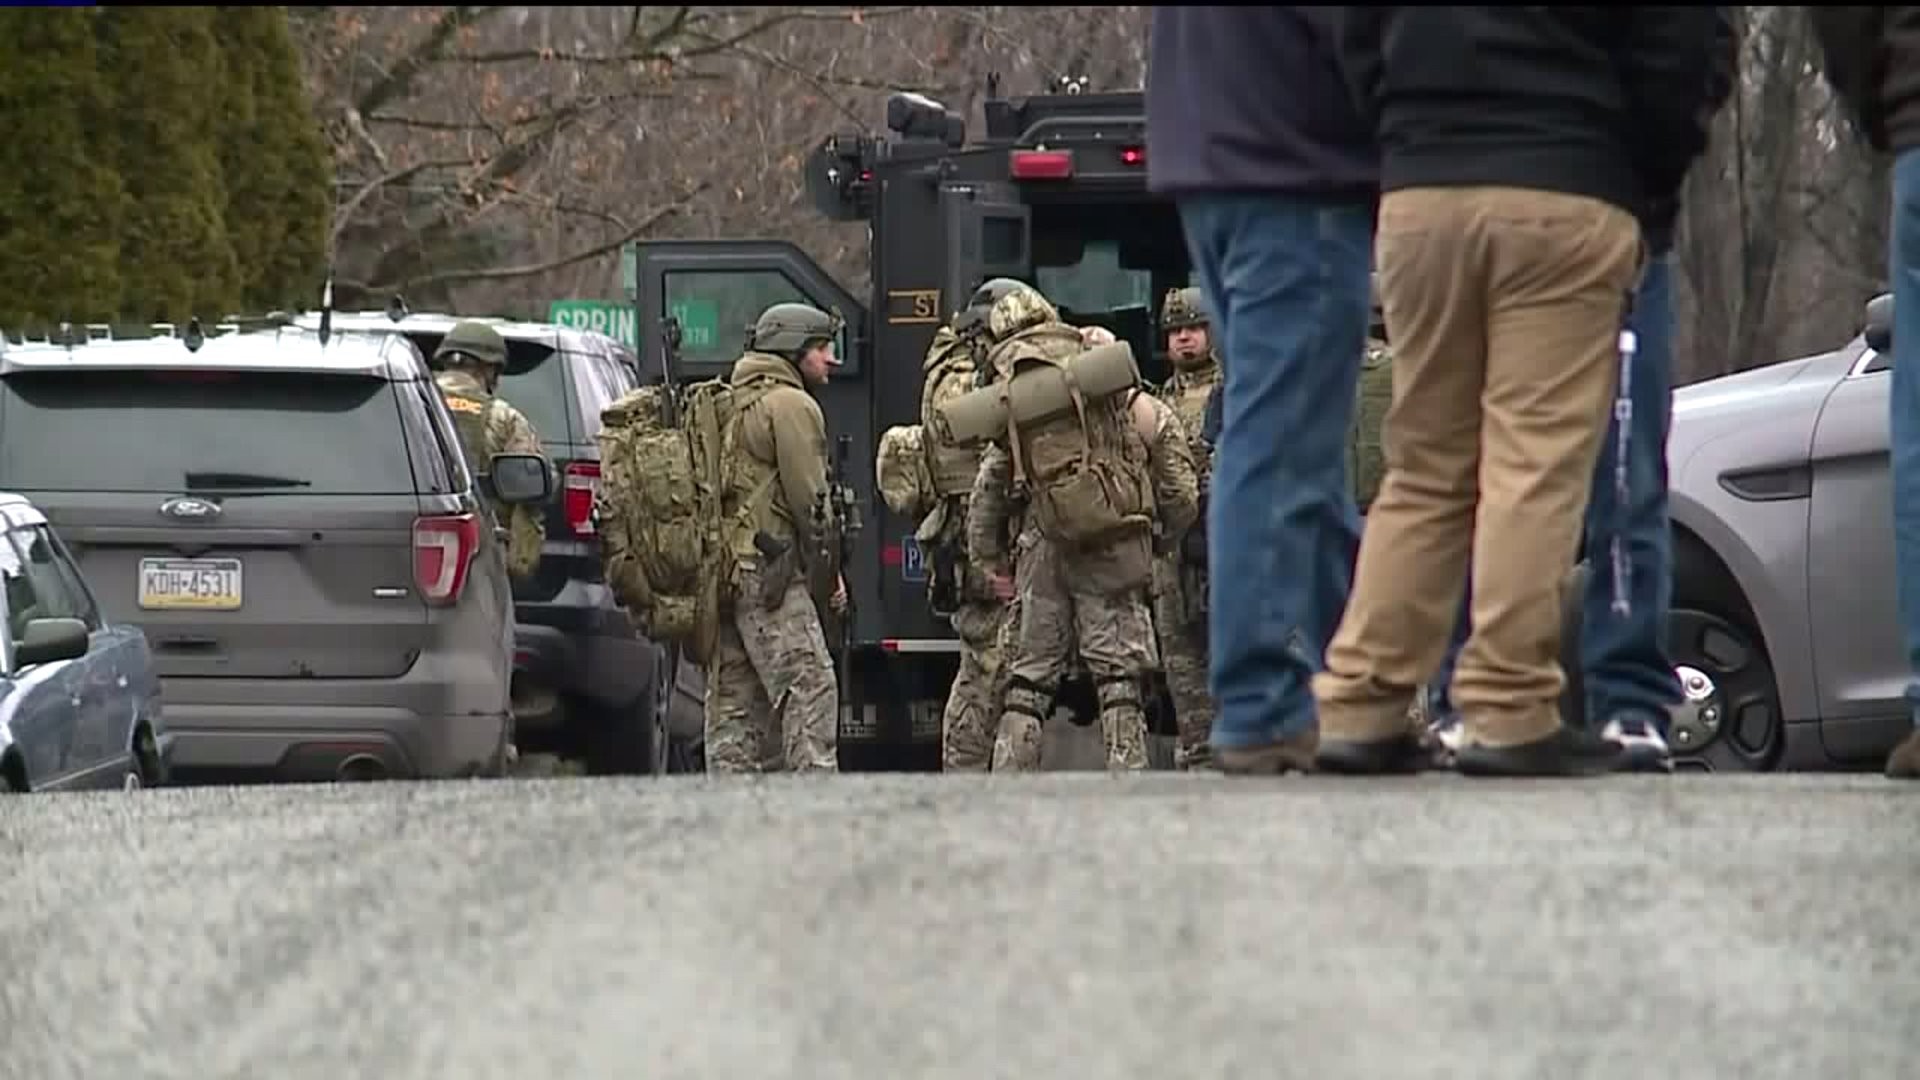 1 Dead, 2 Wounded Following Standoff in Luzerne County